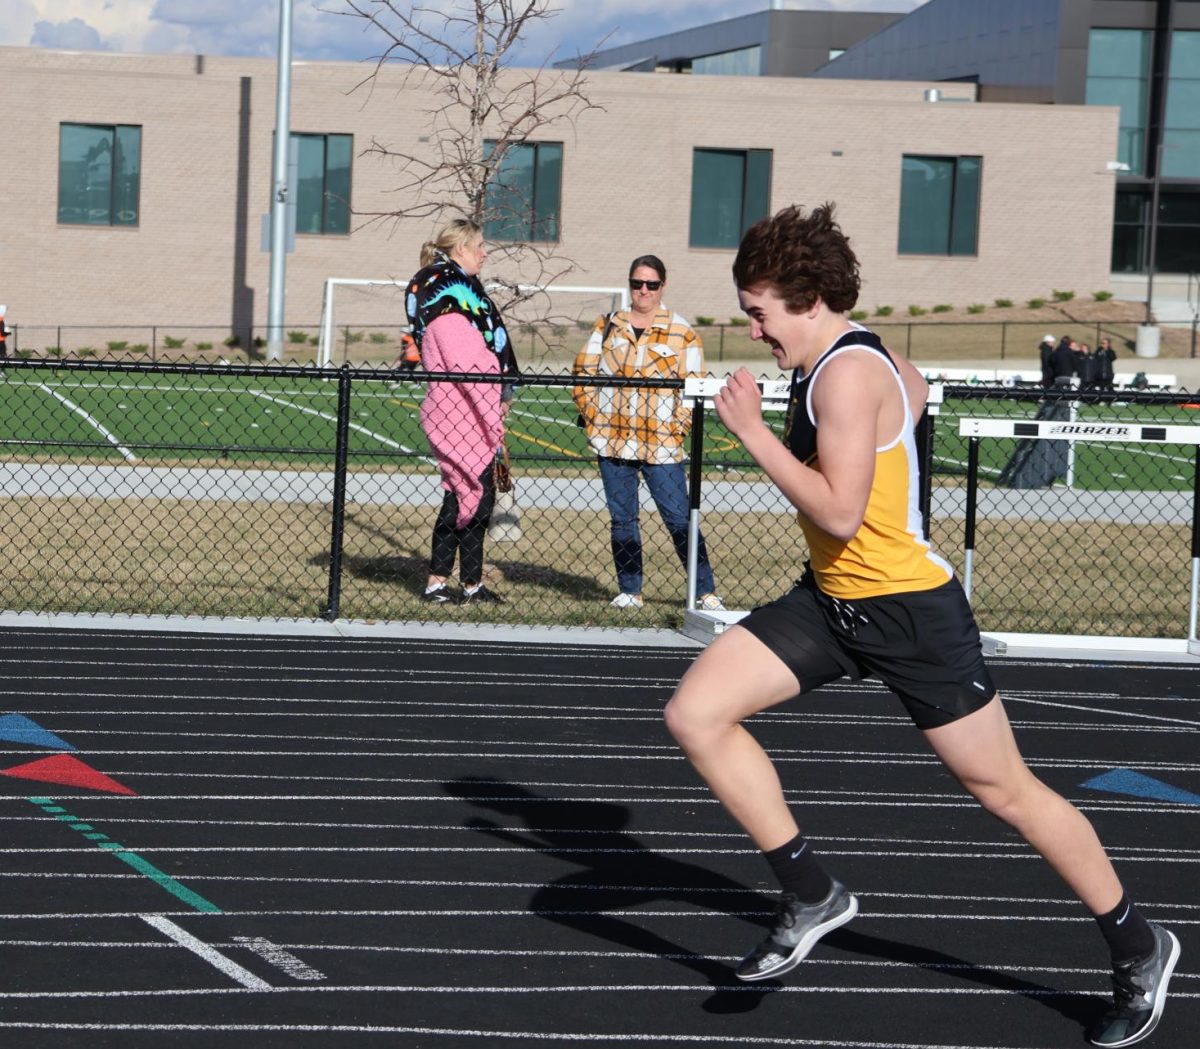 Taking off for his 800m race, freshman Brody Boone takes the lead and finishes first overall.